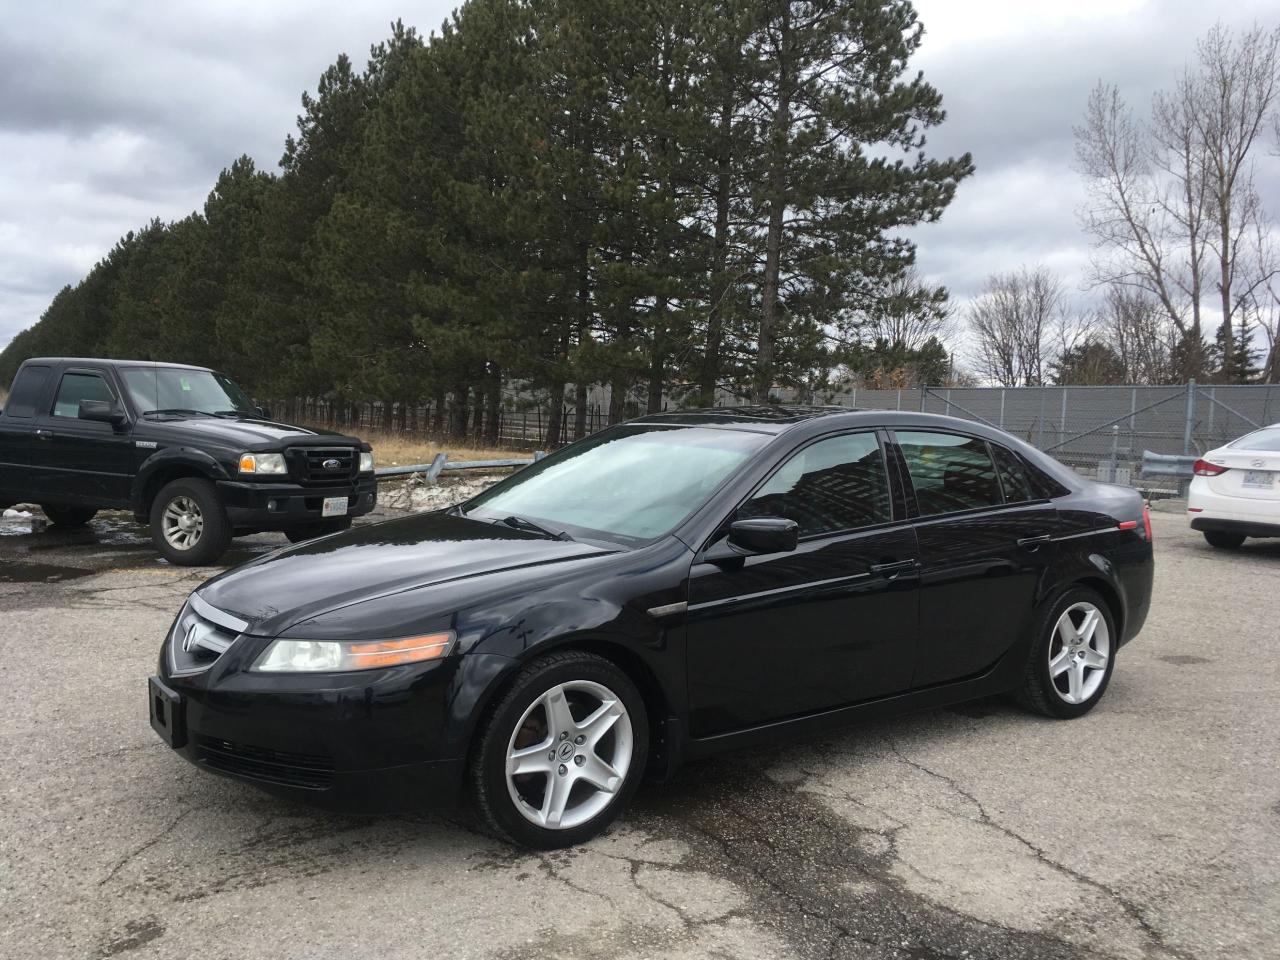 Used 2006 Acura Tl W Navigation Pkg For Sale In Scarborough